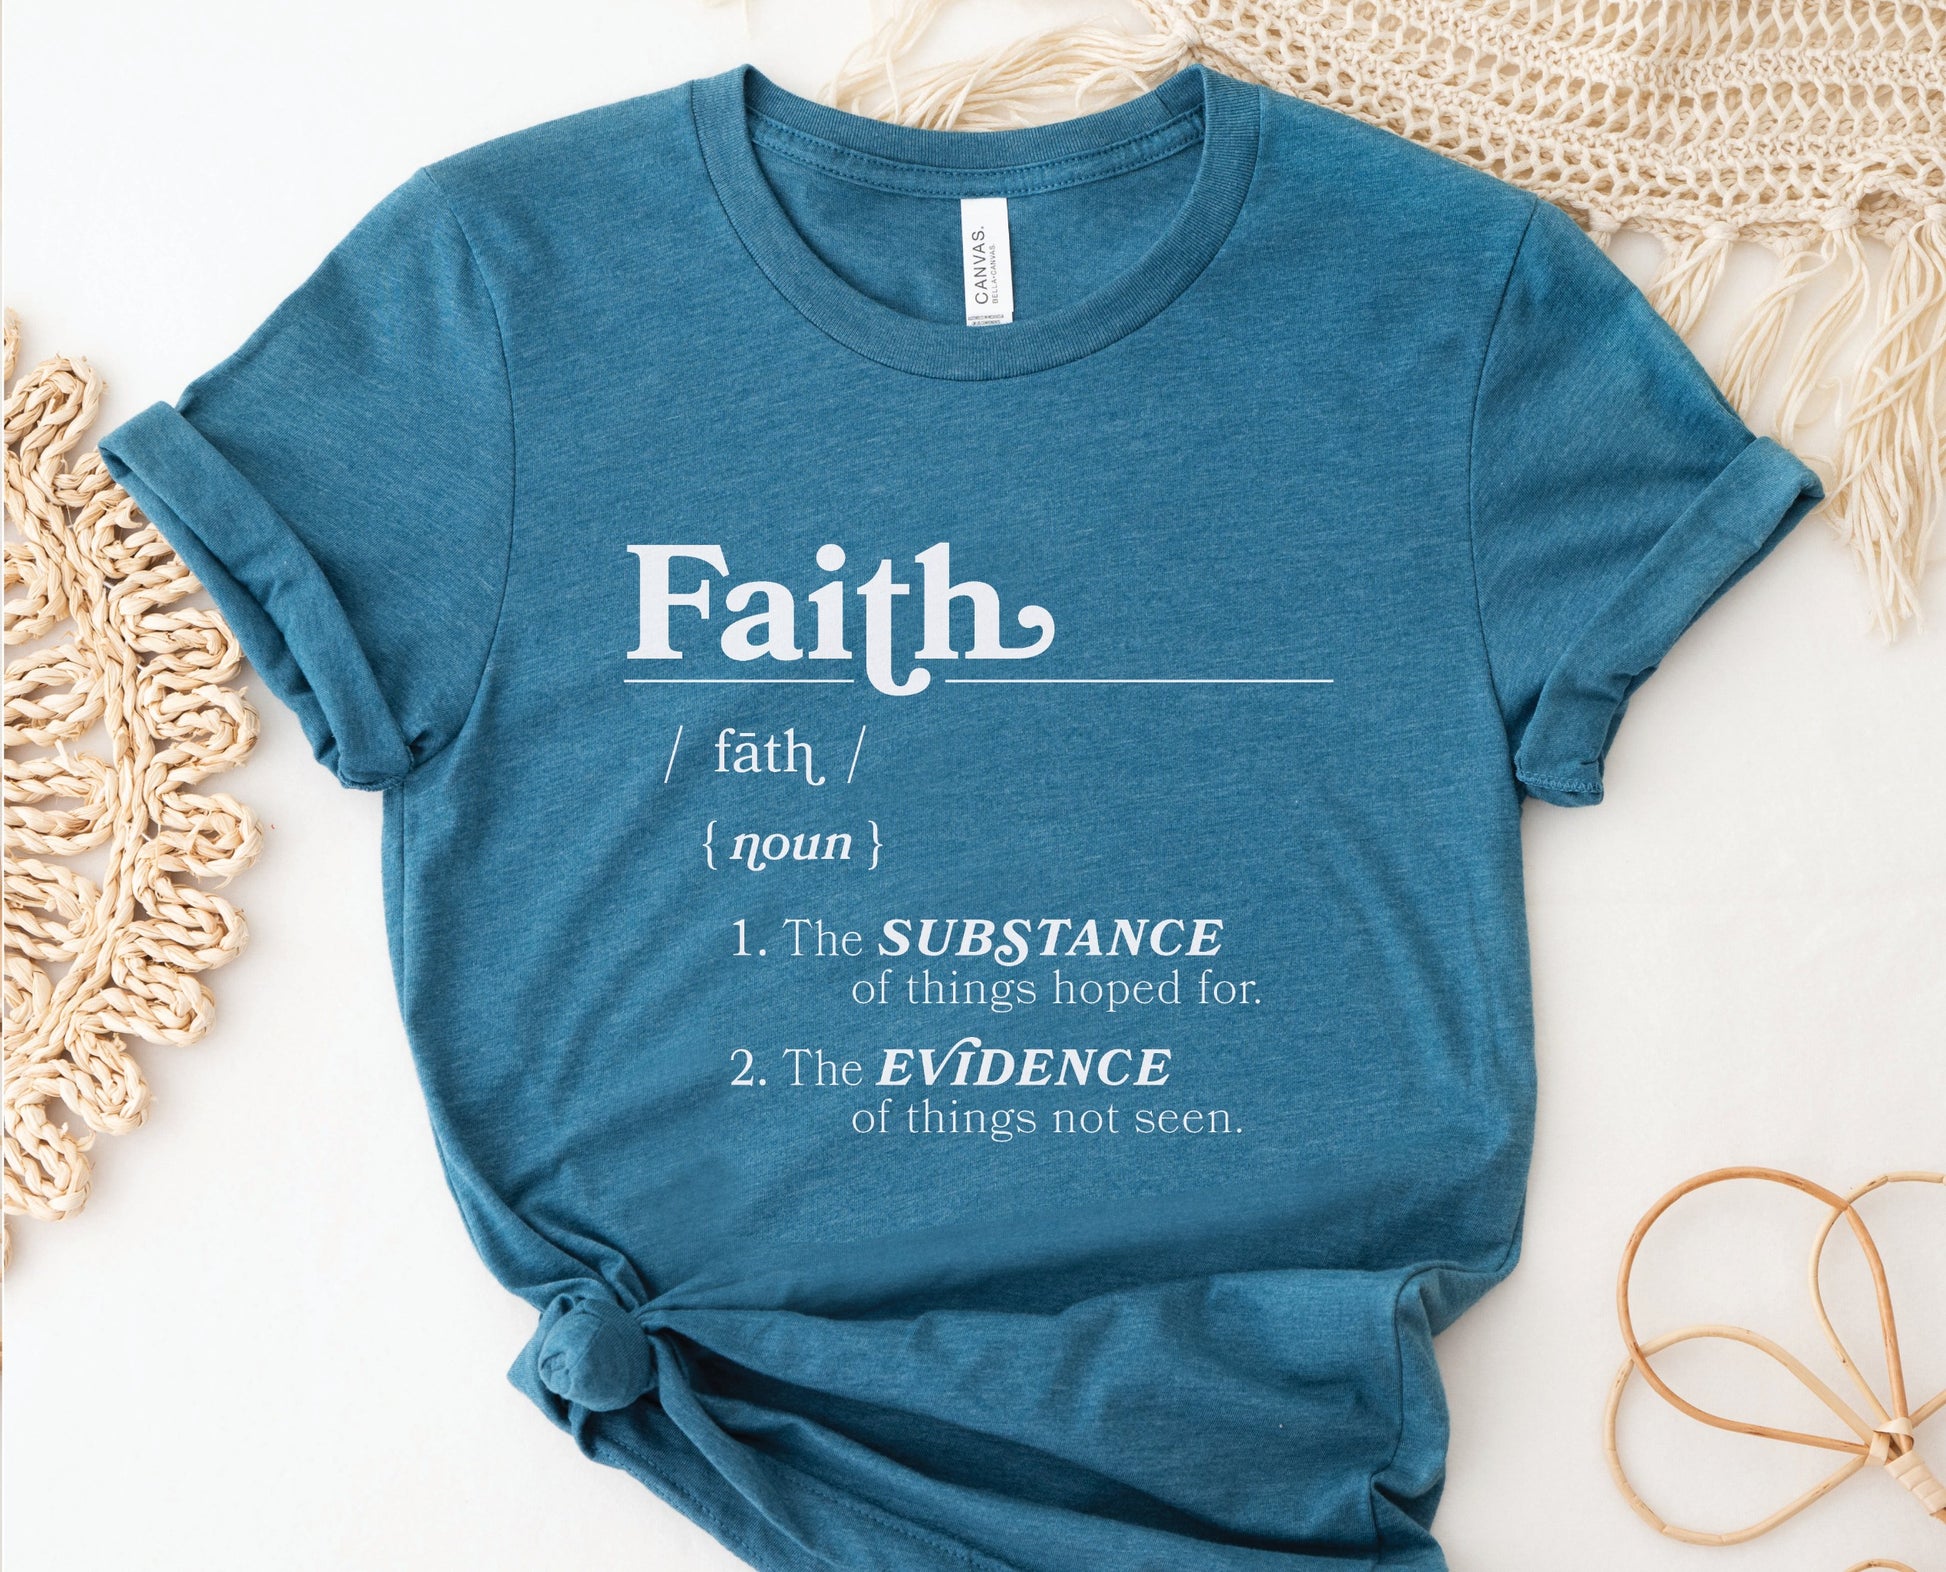 Faith Definition Hebrews 11:1 Christian aesthetic design printed in white on soft heather deep teal unisex t-shirt for women and men